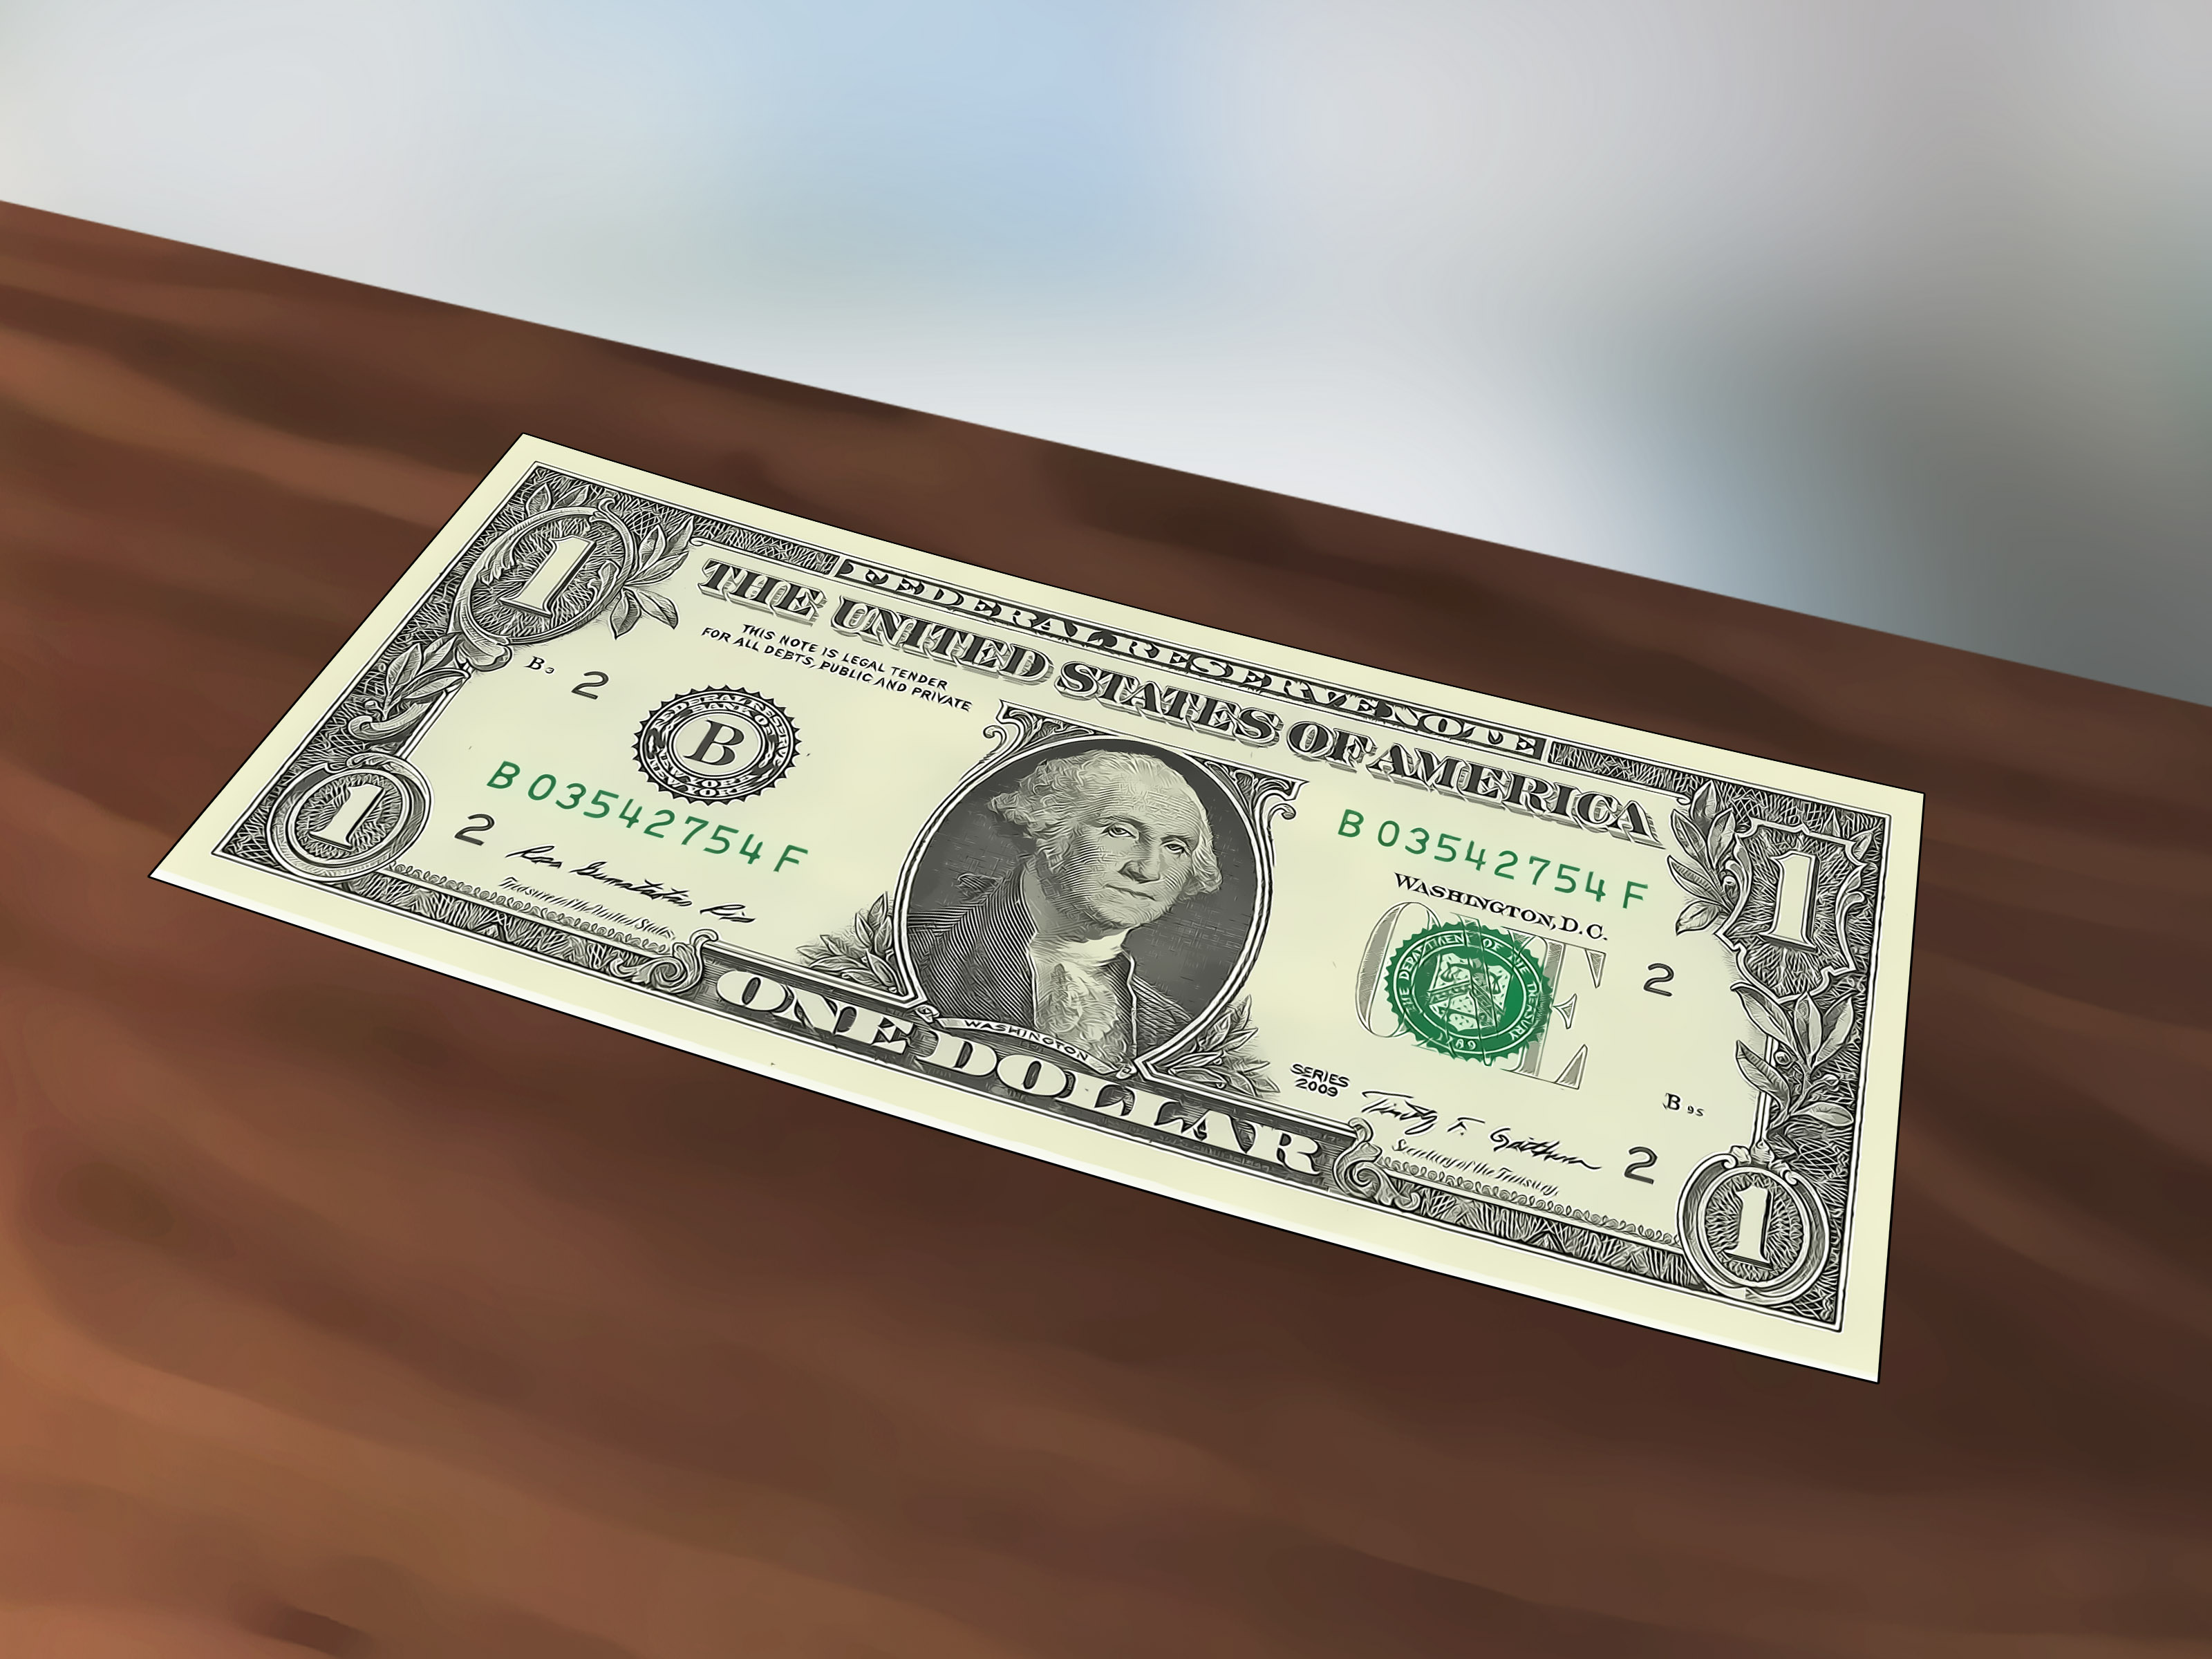 4 Ways to Straighten Out a Dollar Bill - wikiHow